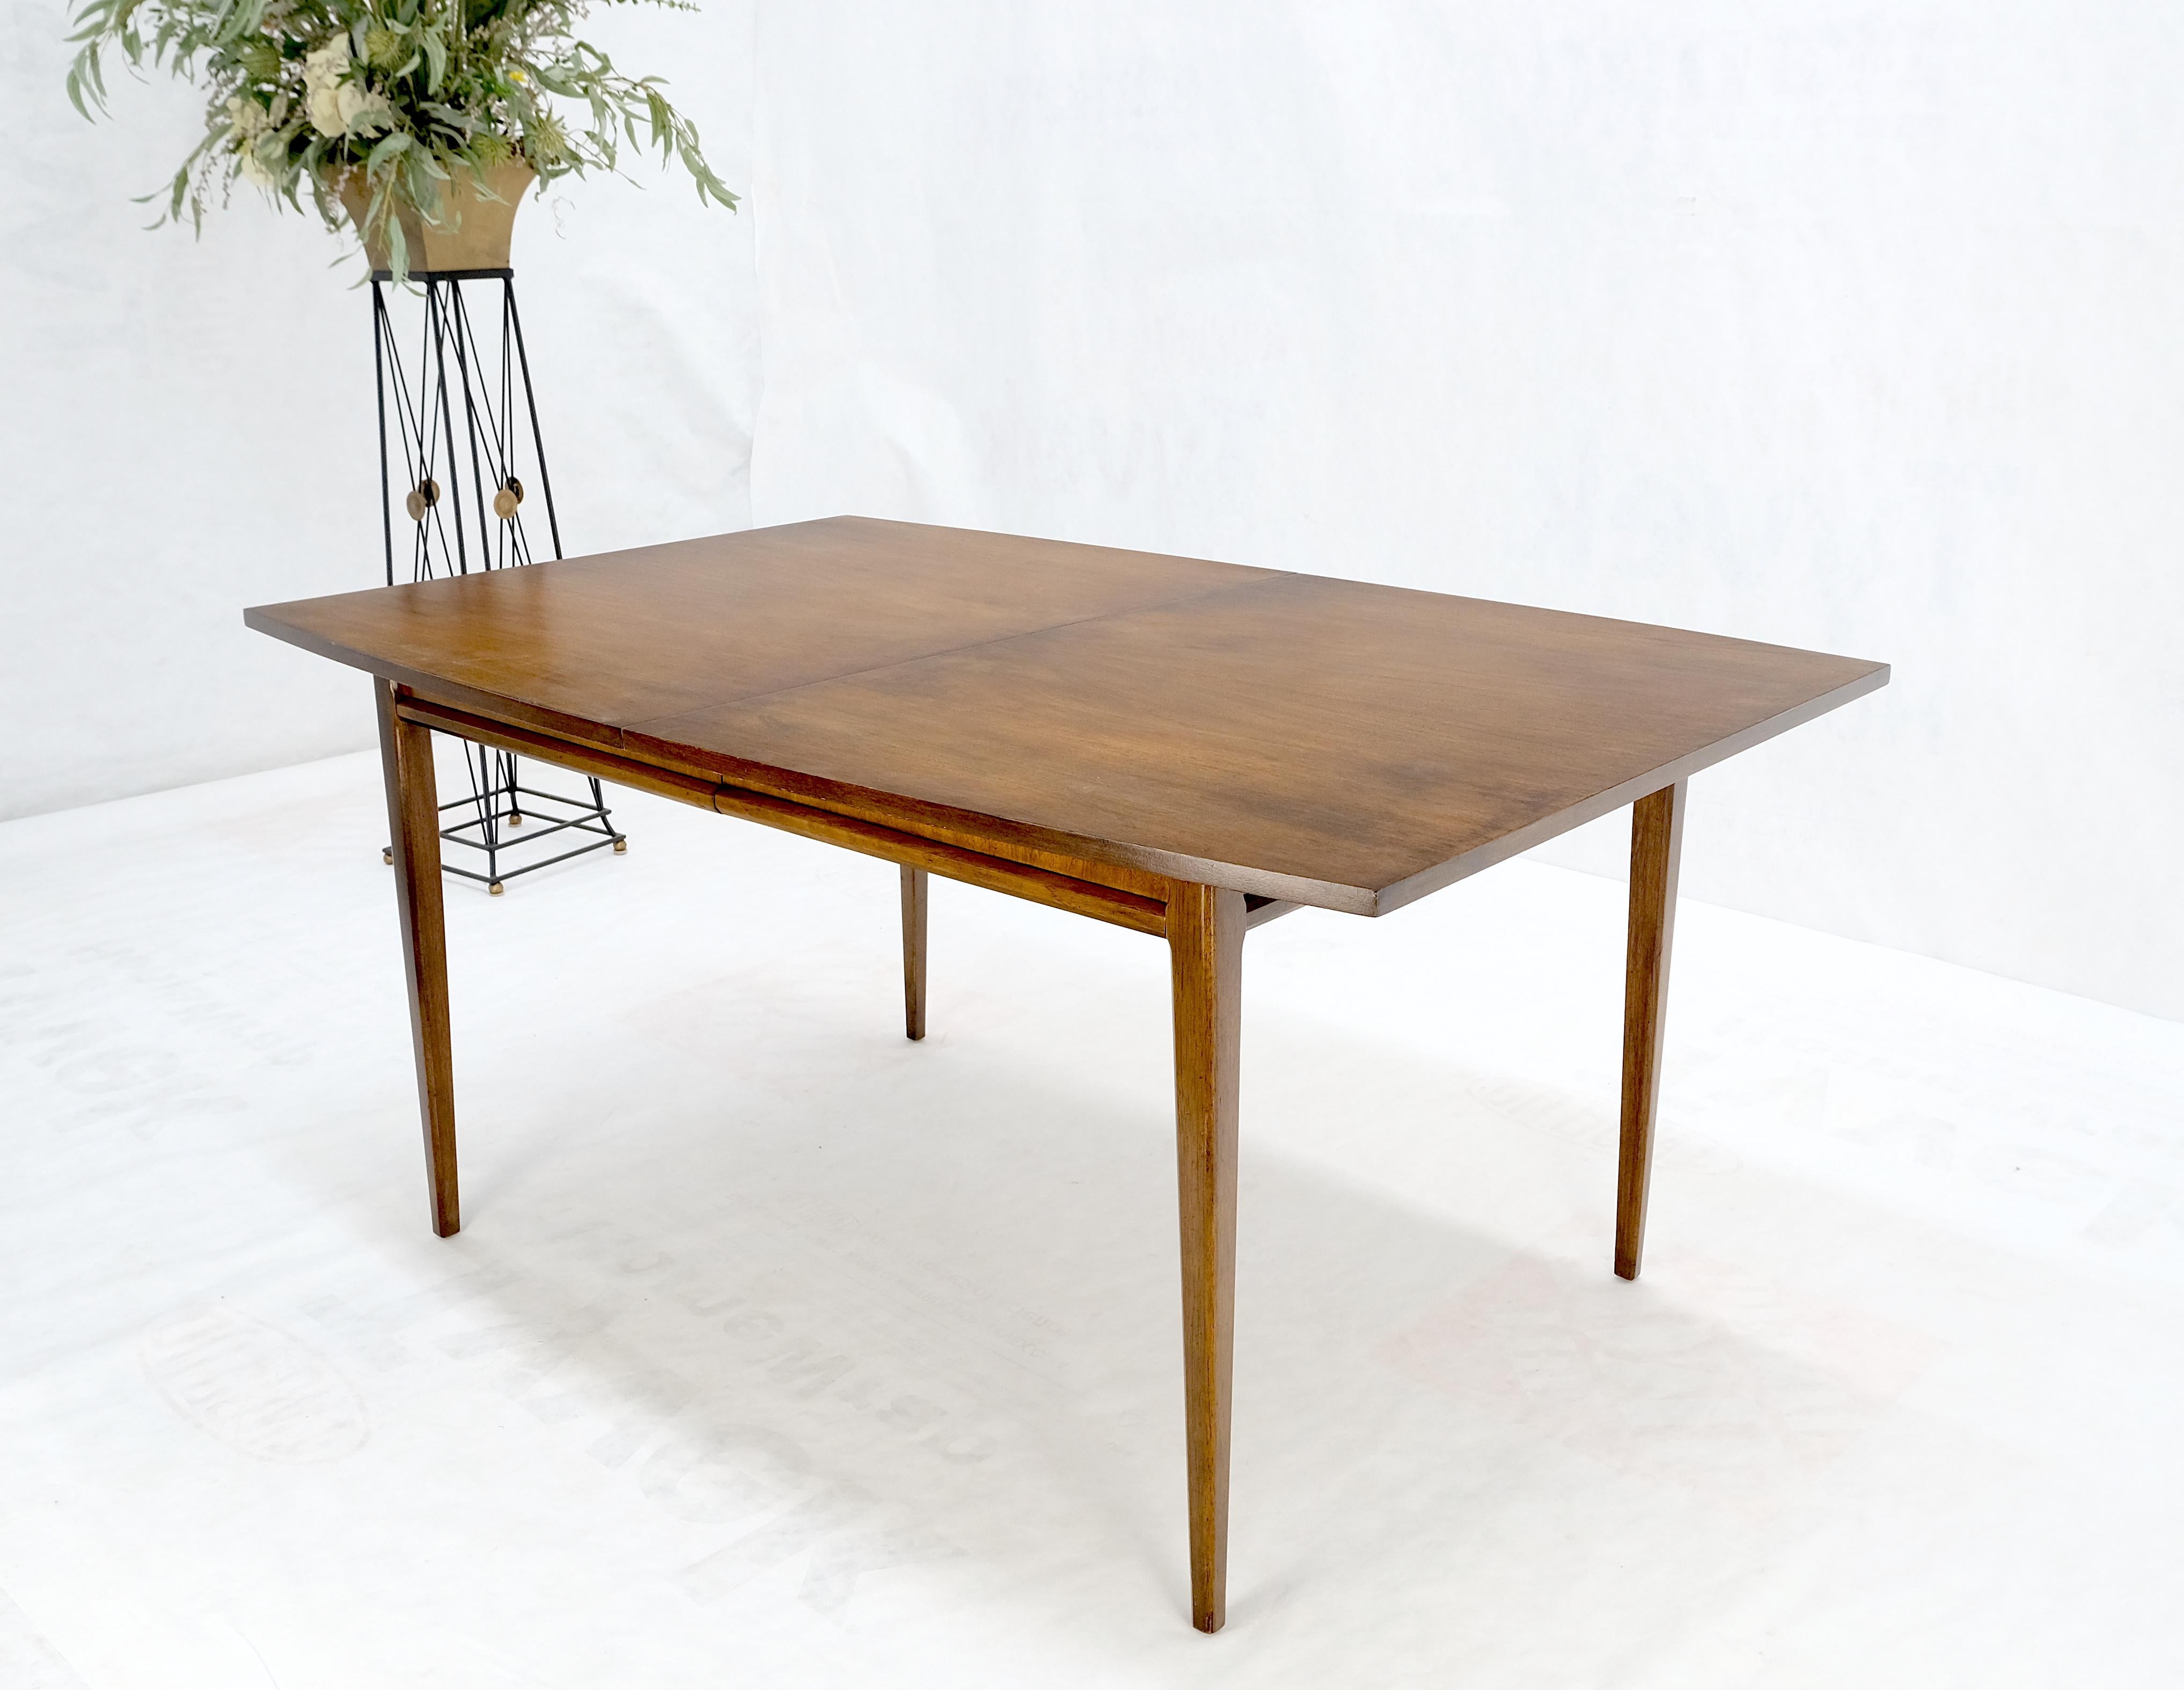 American Walnut Danish Mid Century Modern Style Dining Table 2 Extension Boards  In Good Condition For Sale In Rockaway, NJ